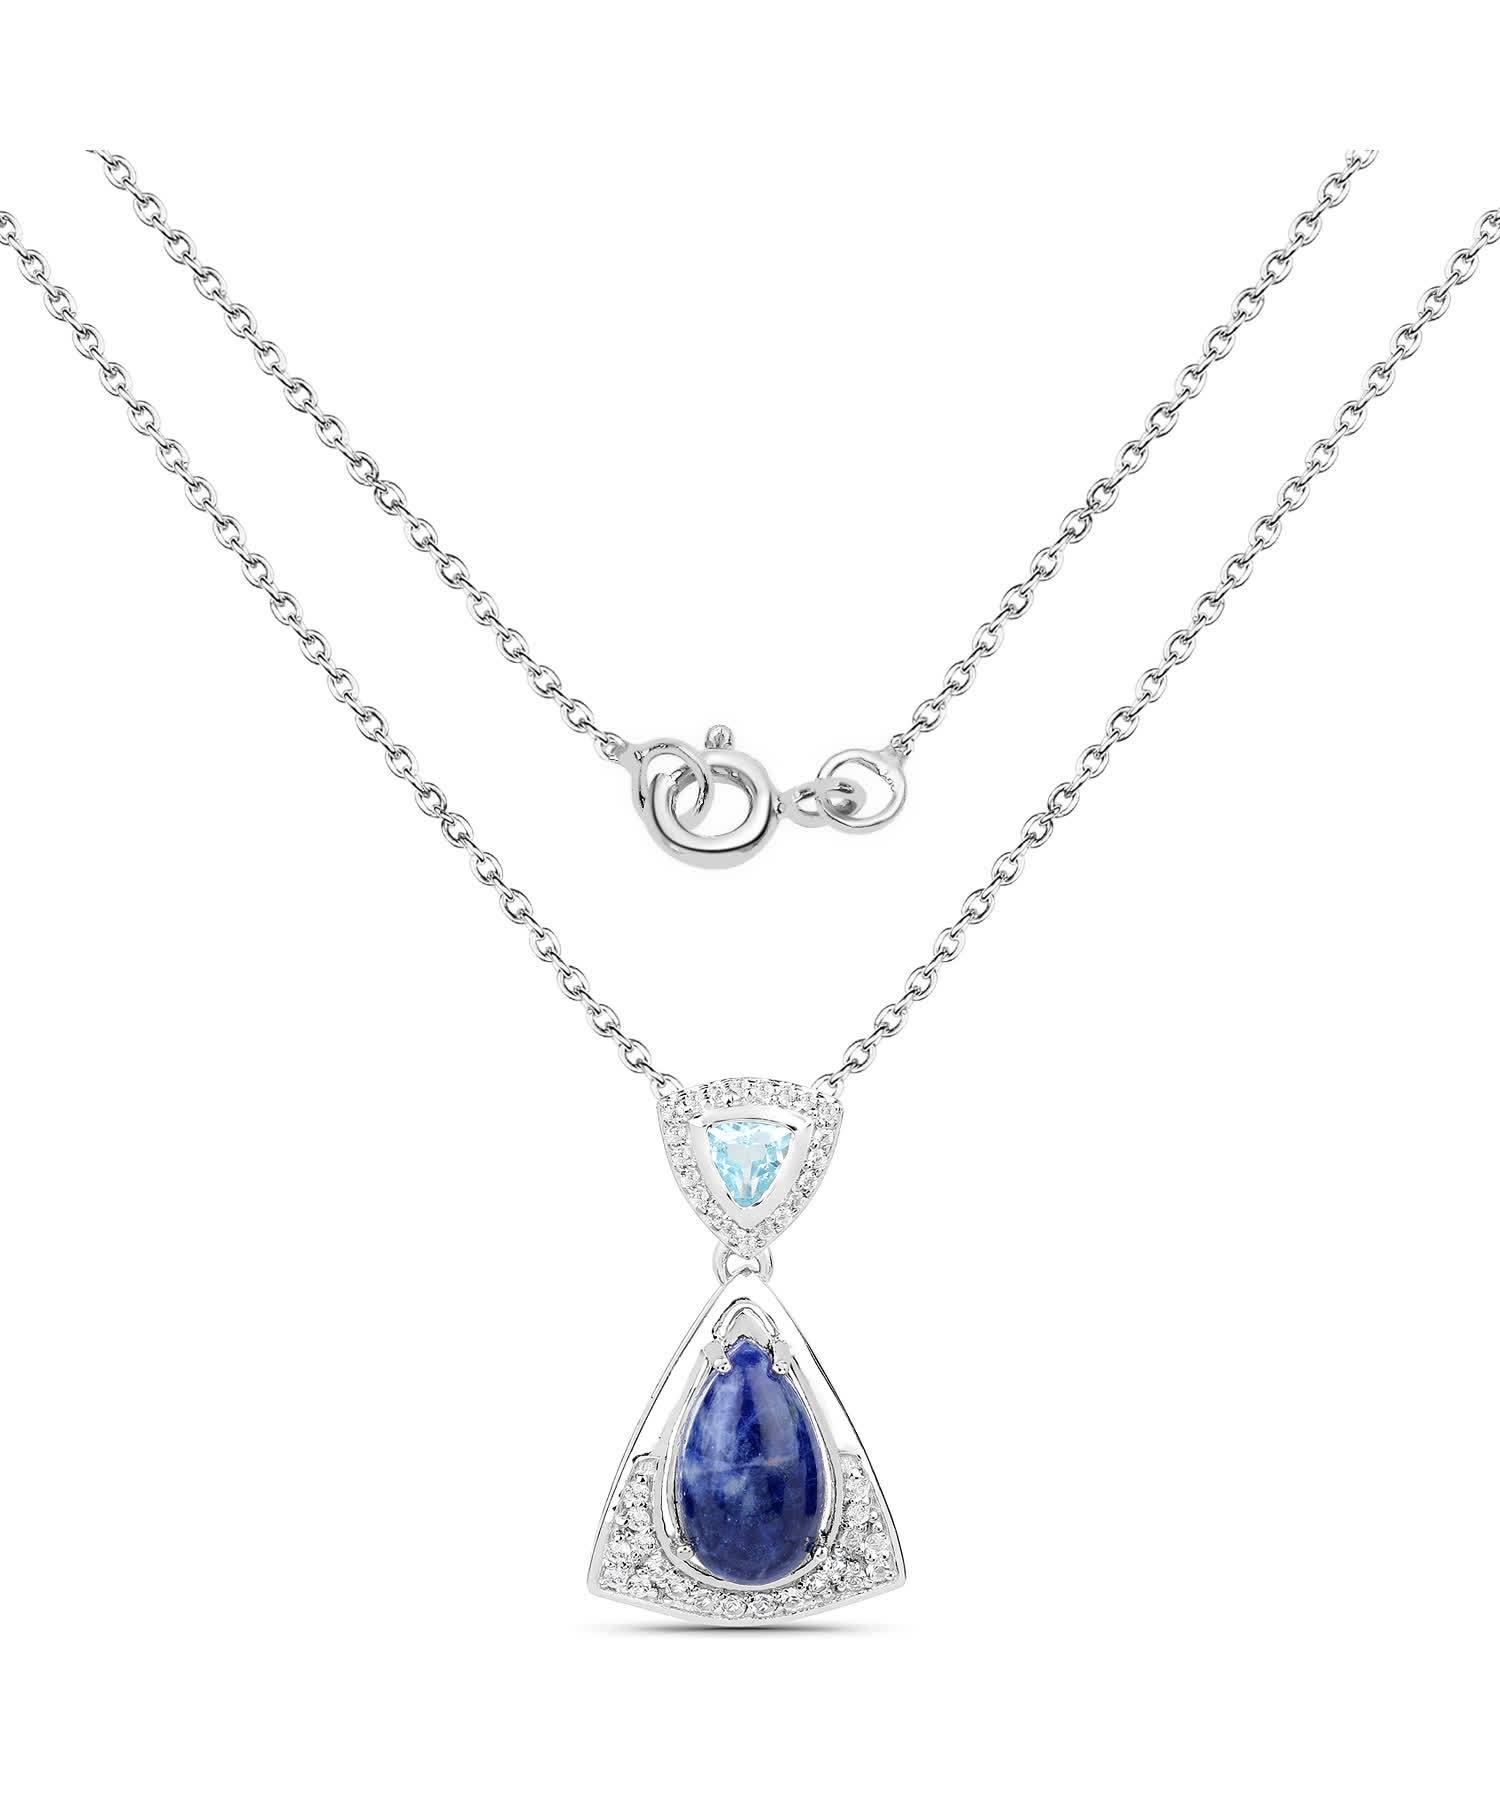 2.34ctw Natural Aventurine and Topaz Rhodium Plated 925 Sterling Silver Triangle Pendant With Chain View 2